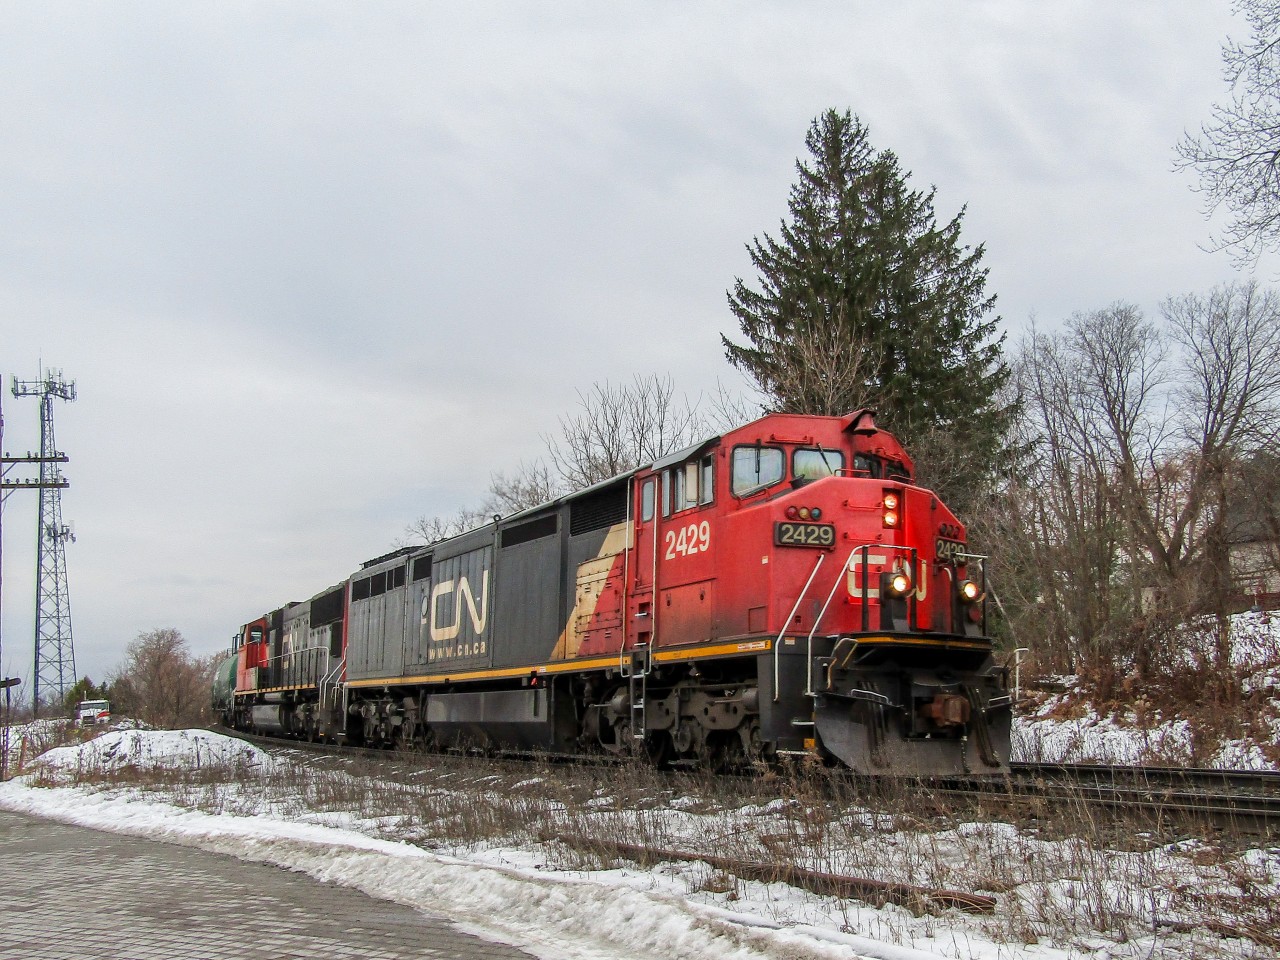 CN 303 travels north coming around the bend at Gormley ON, and is greeting with a clear on the approach to Quaker, and a very happy railfan. CN 2429 (C40-8M), CN 5611 (SD70I) make up the power for this train.
This was actually the first ever train I shot with my current camera, and this specific consist isn't catchable today, as CN 2429 is one of many C40-8M "Cowls" that have been sold for scrap. While that news, when it first broke out, was very sad, at least I have this tangible memory of 2429 riding the rails one last time.